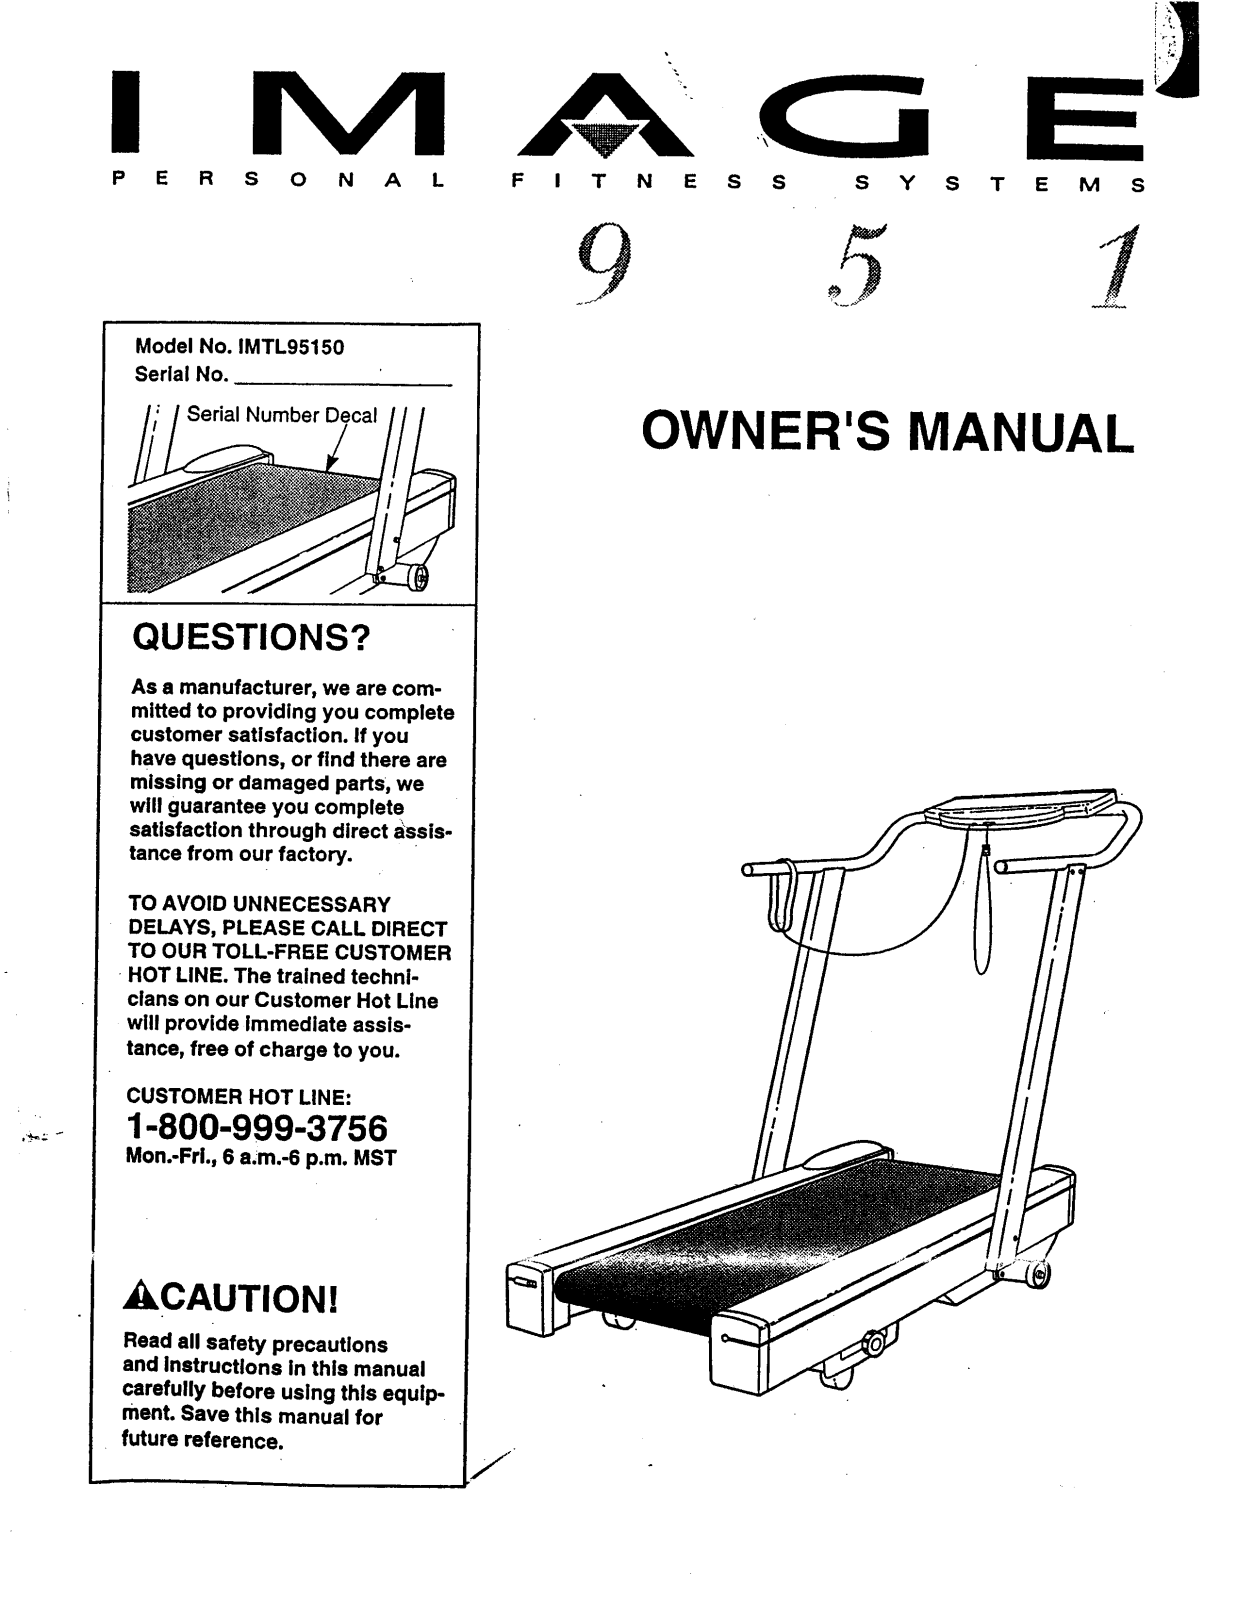 Image IMTL95150 Owner's Manual